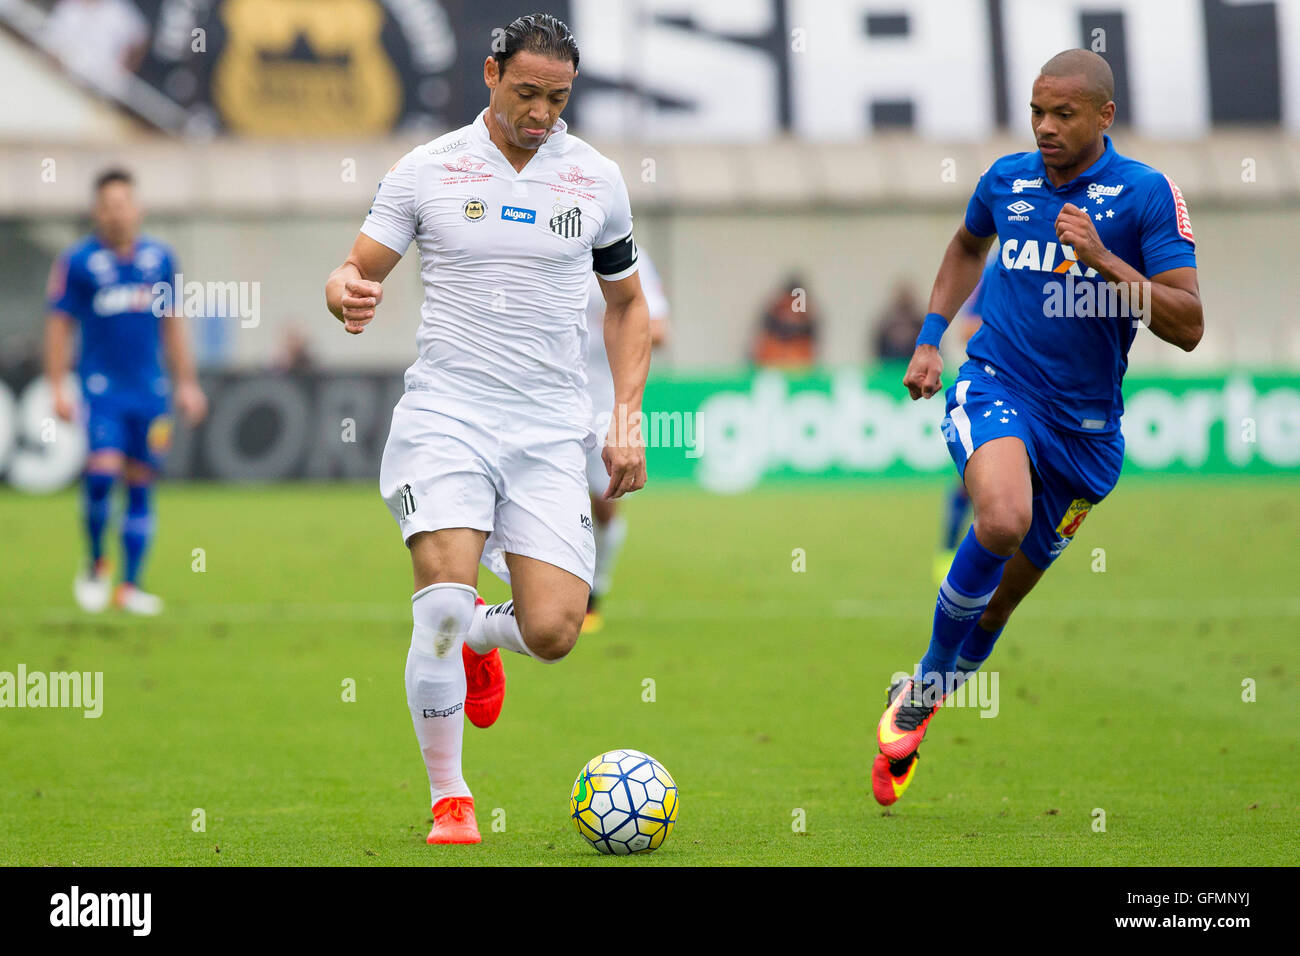 Ricardo Oliveira during the game between Santos and Cruzeiro held at Vila Belmiro stadium in Santos. The game is valid for the 17th round of the Brasileir?o 2016 Chevrolet. Stock Photo